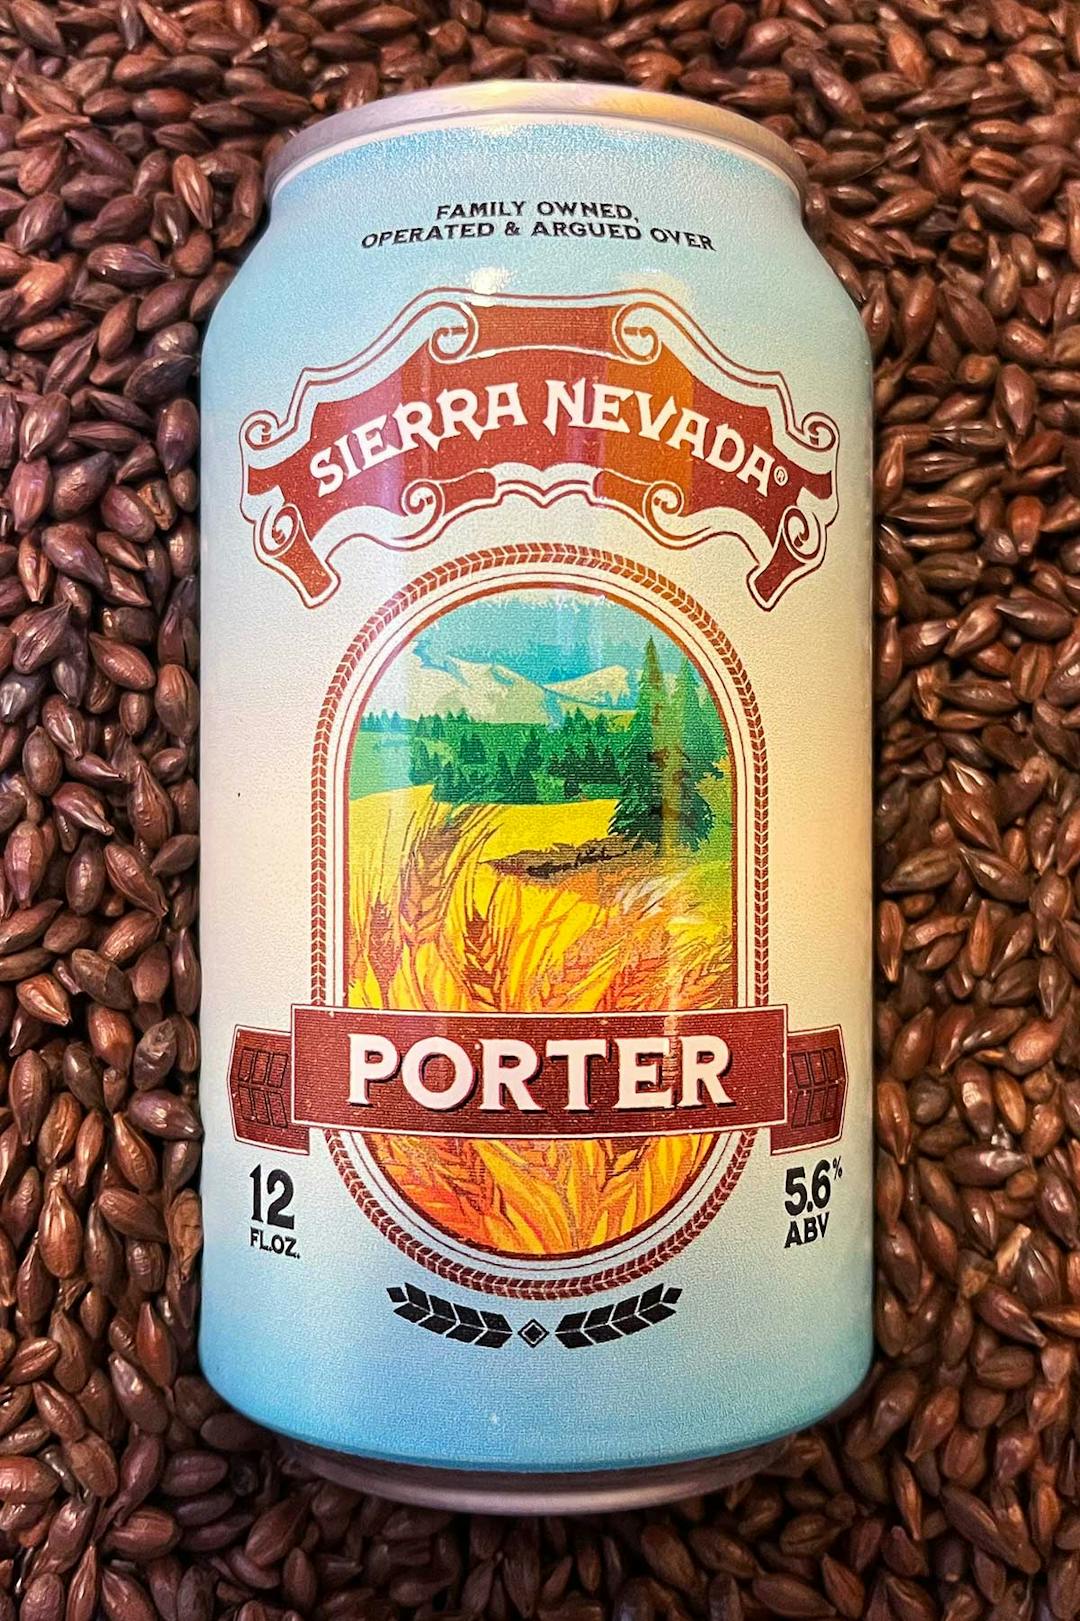 A can of Sierra Nevada Porter resting in a bed of dark roasted barley